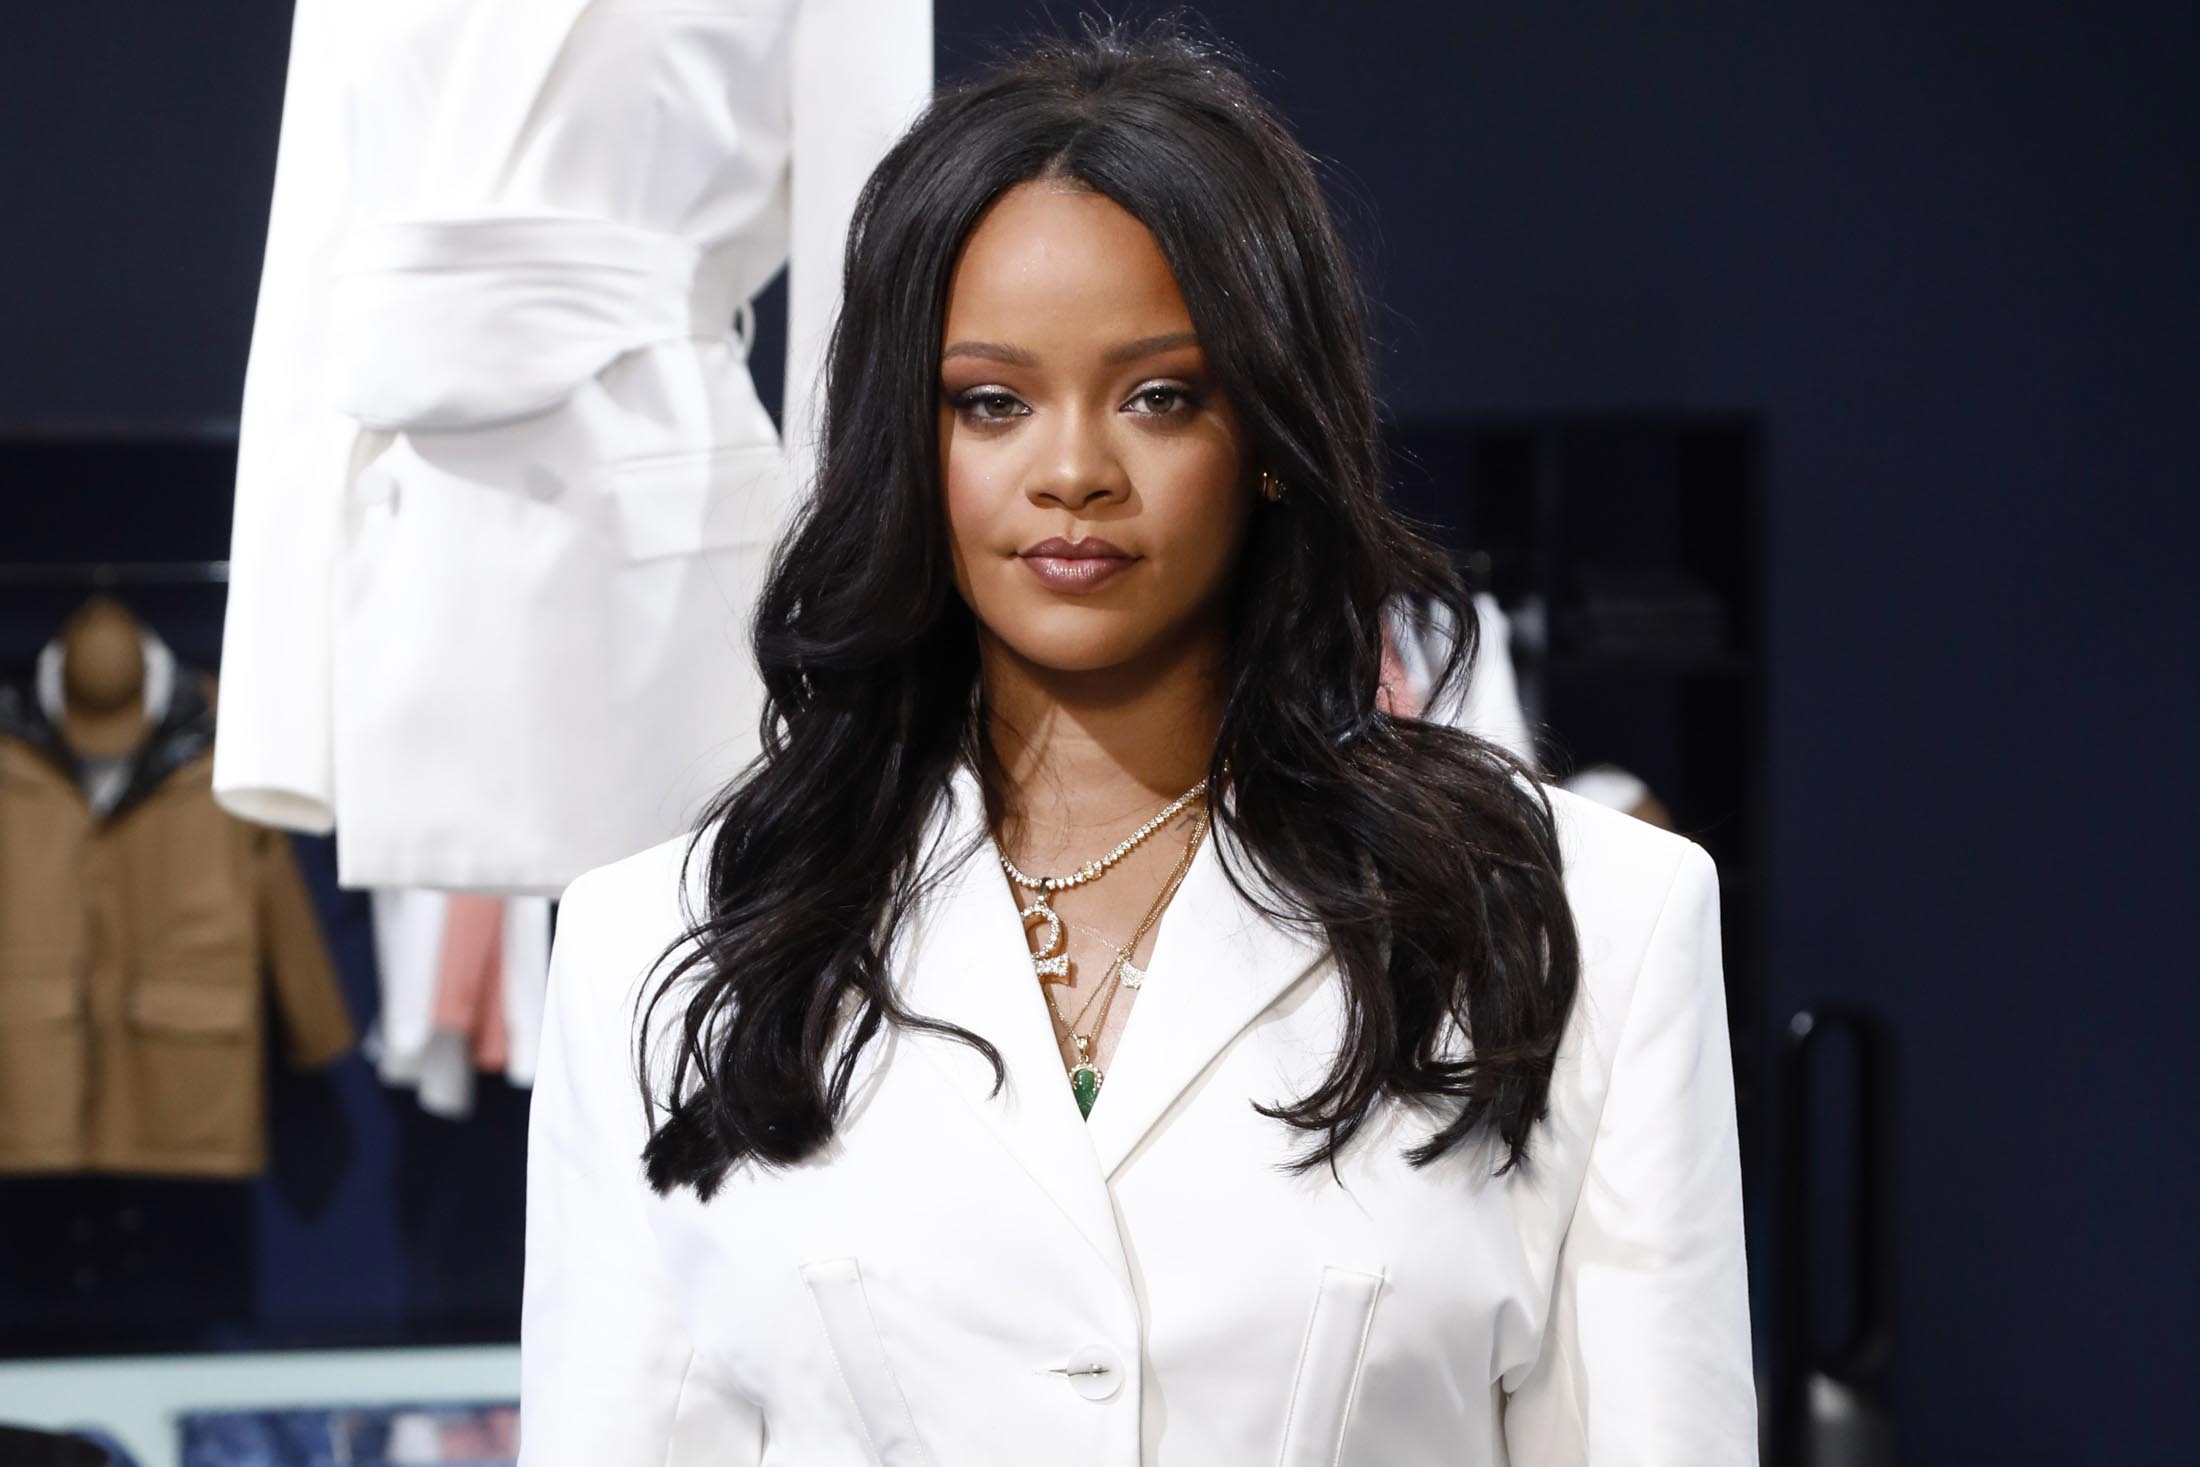 Making history: Rihanna launches brand Fenty in Paris store